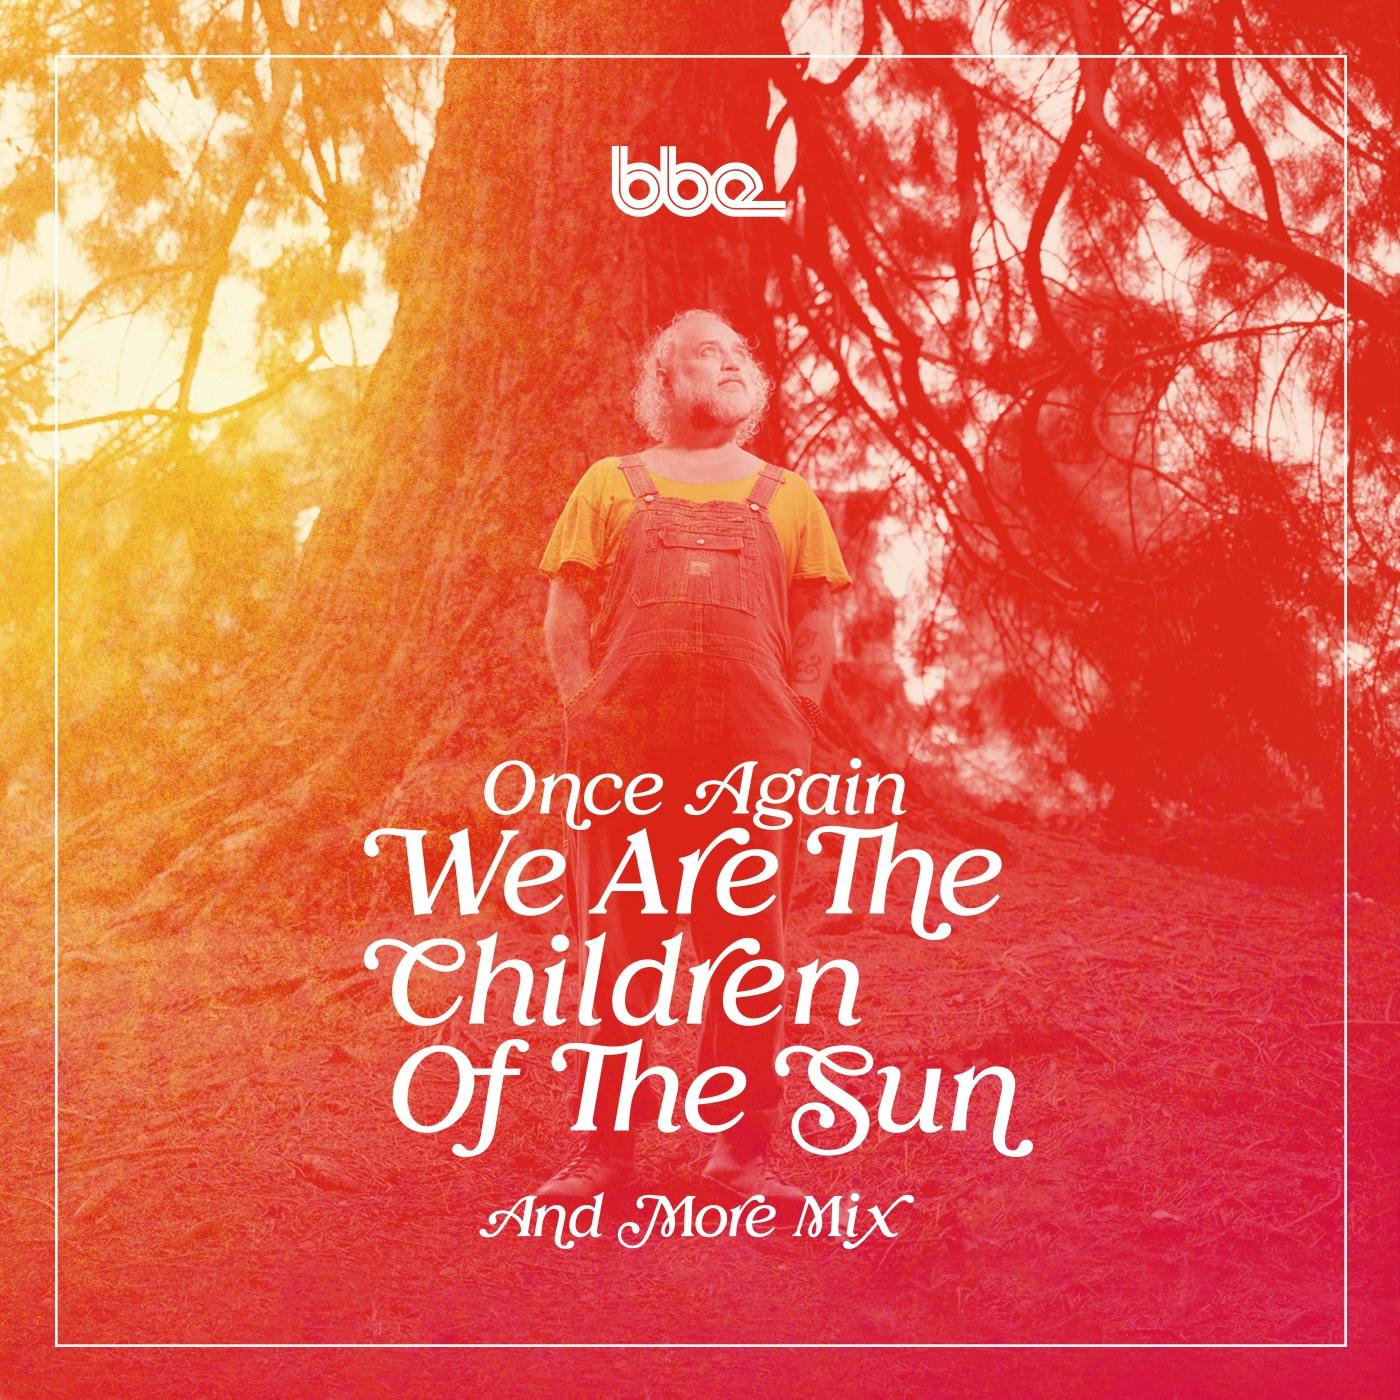 Once Again We Are The Children Of The Sun & More Mix by Paul Hillery